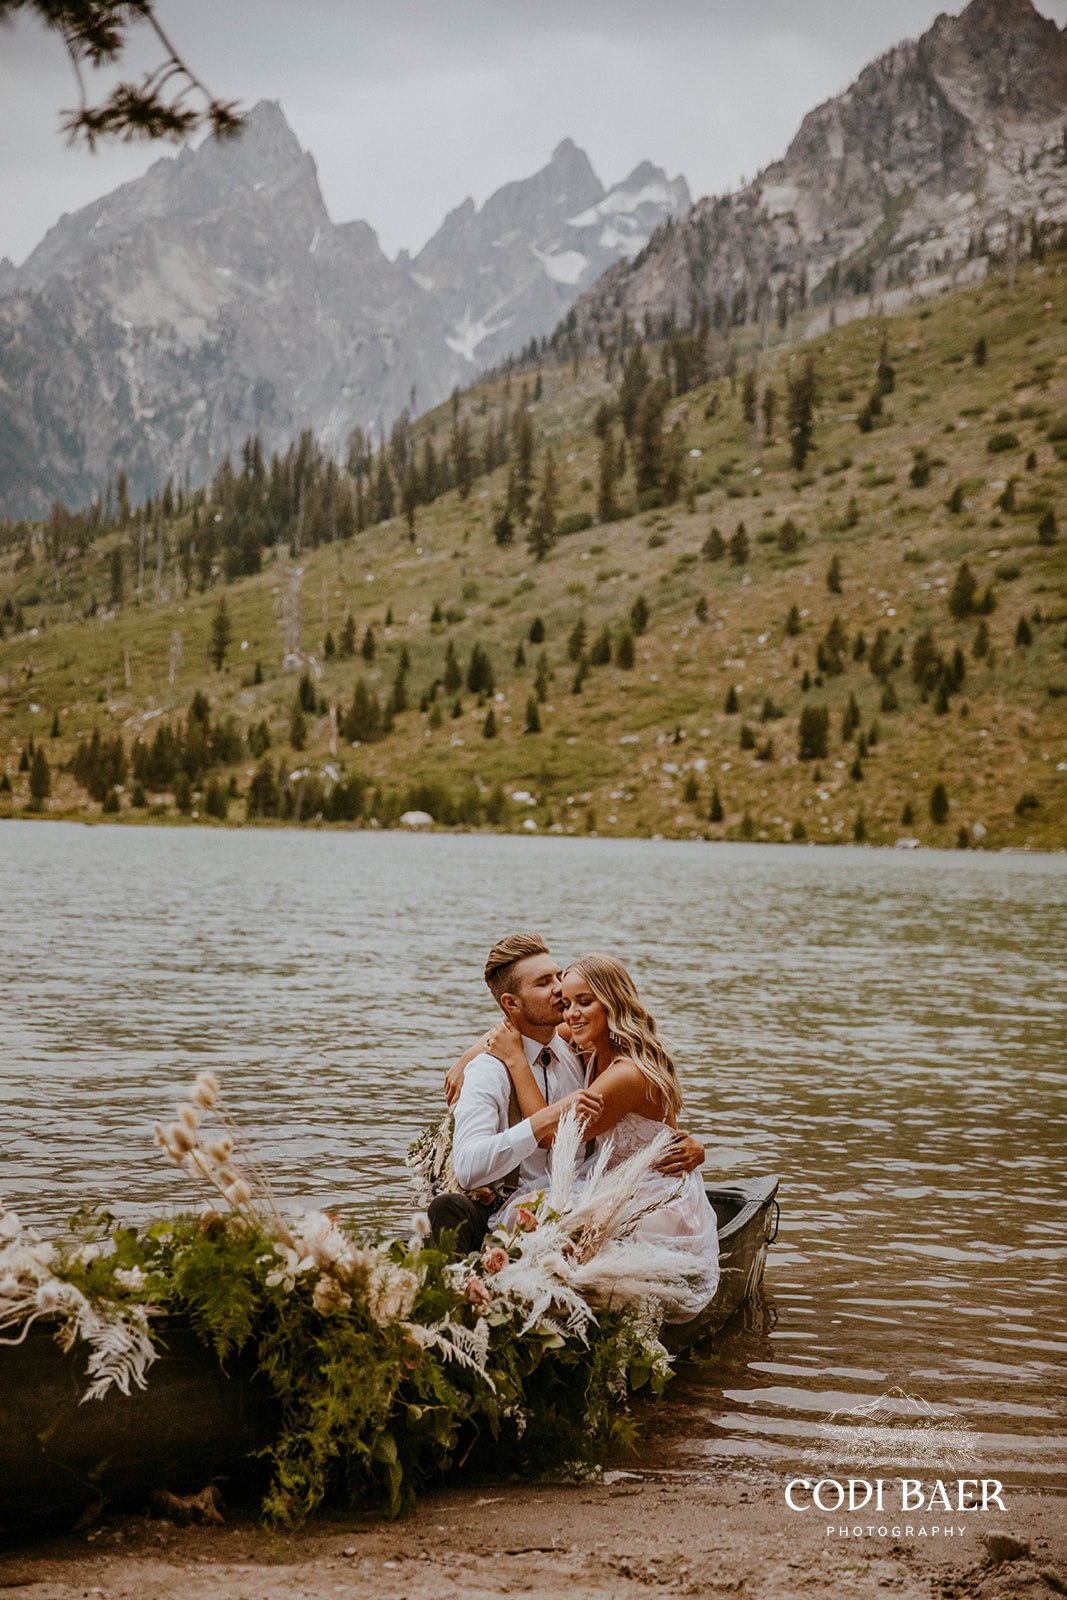 Resort wedding can be adventurous, too. This bride and groom took advantage of a canoe!